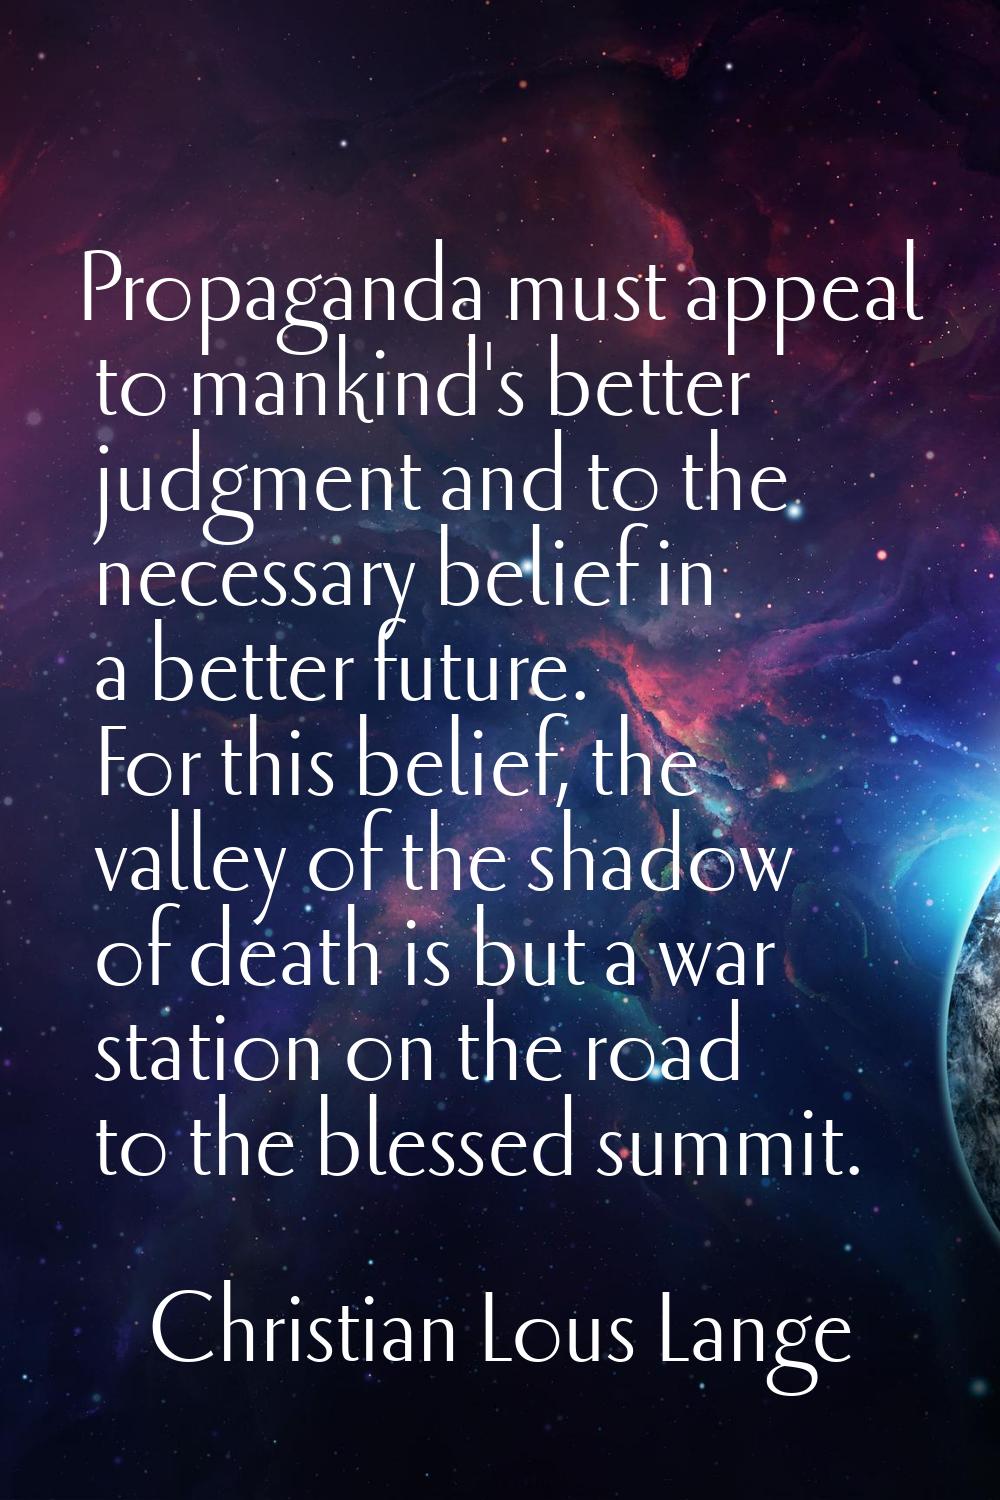 Propaganda must appeal to mankind's better judgment and to the necessary belief in a better future.